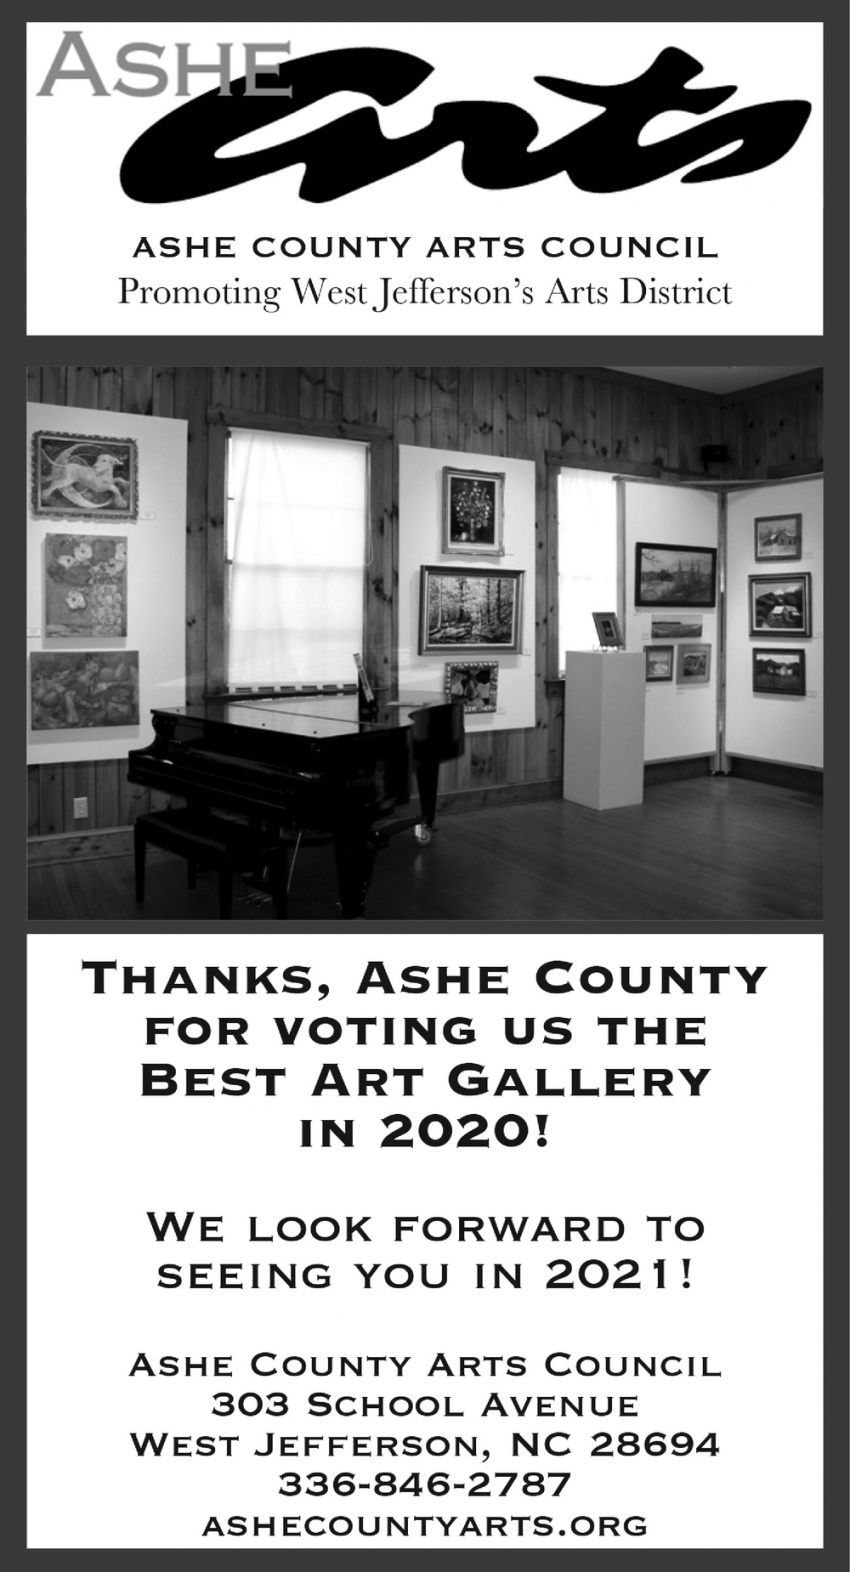 Thanks, Ashe County for Voting Us the Best Art Gallery in 2020!